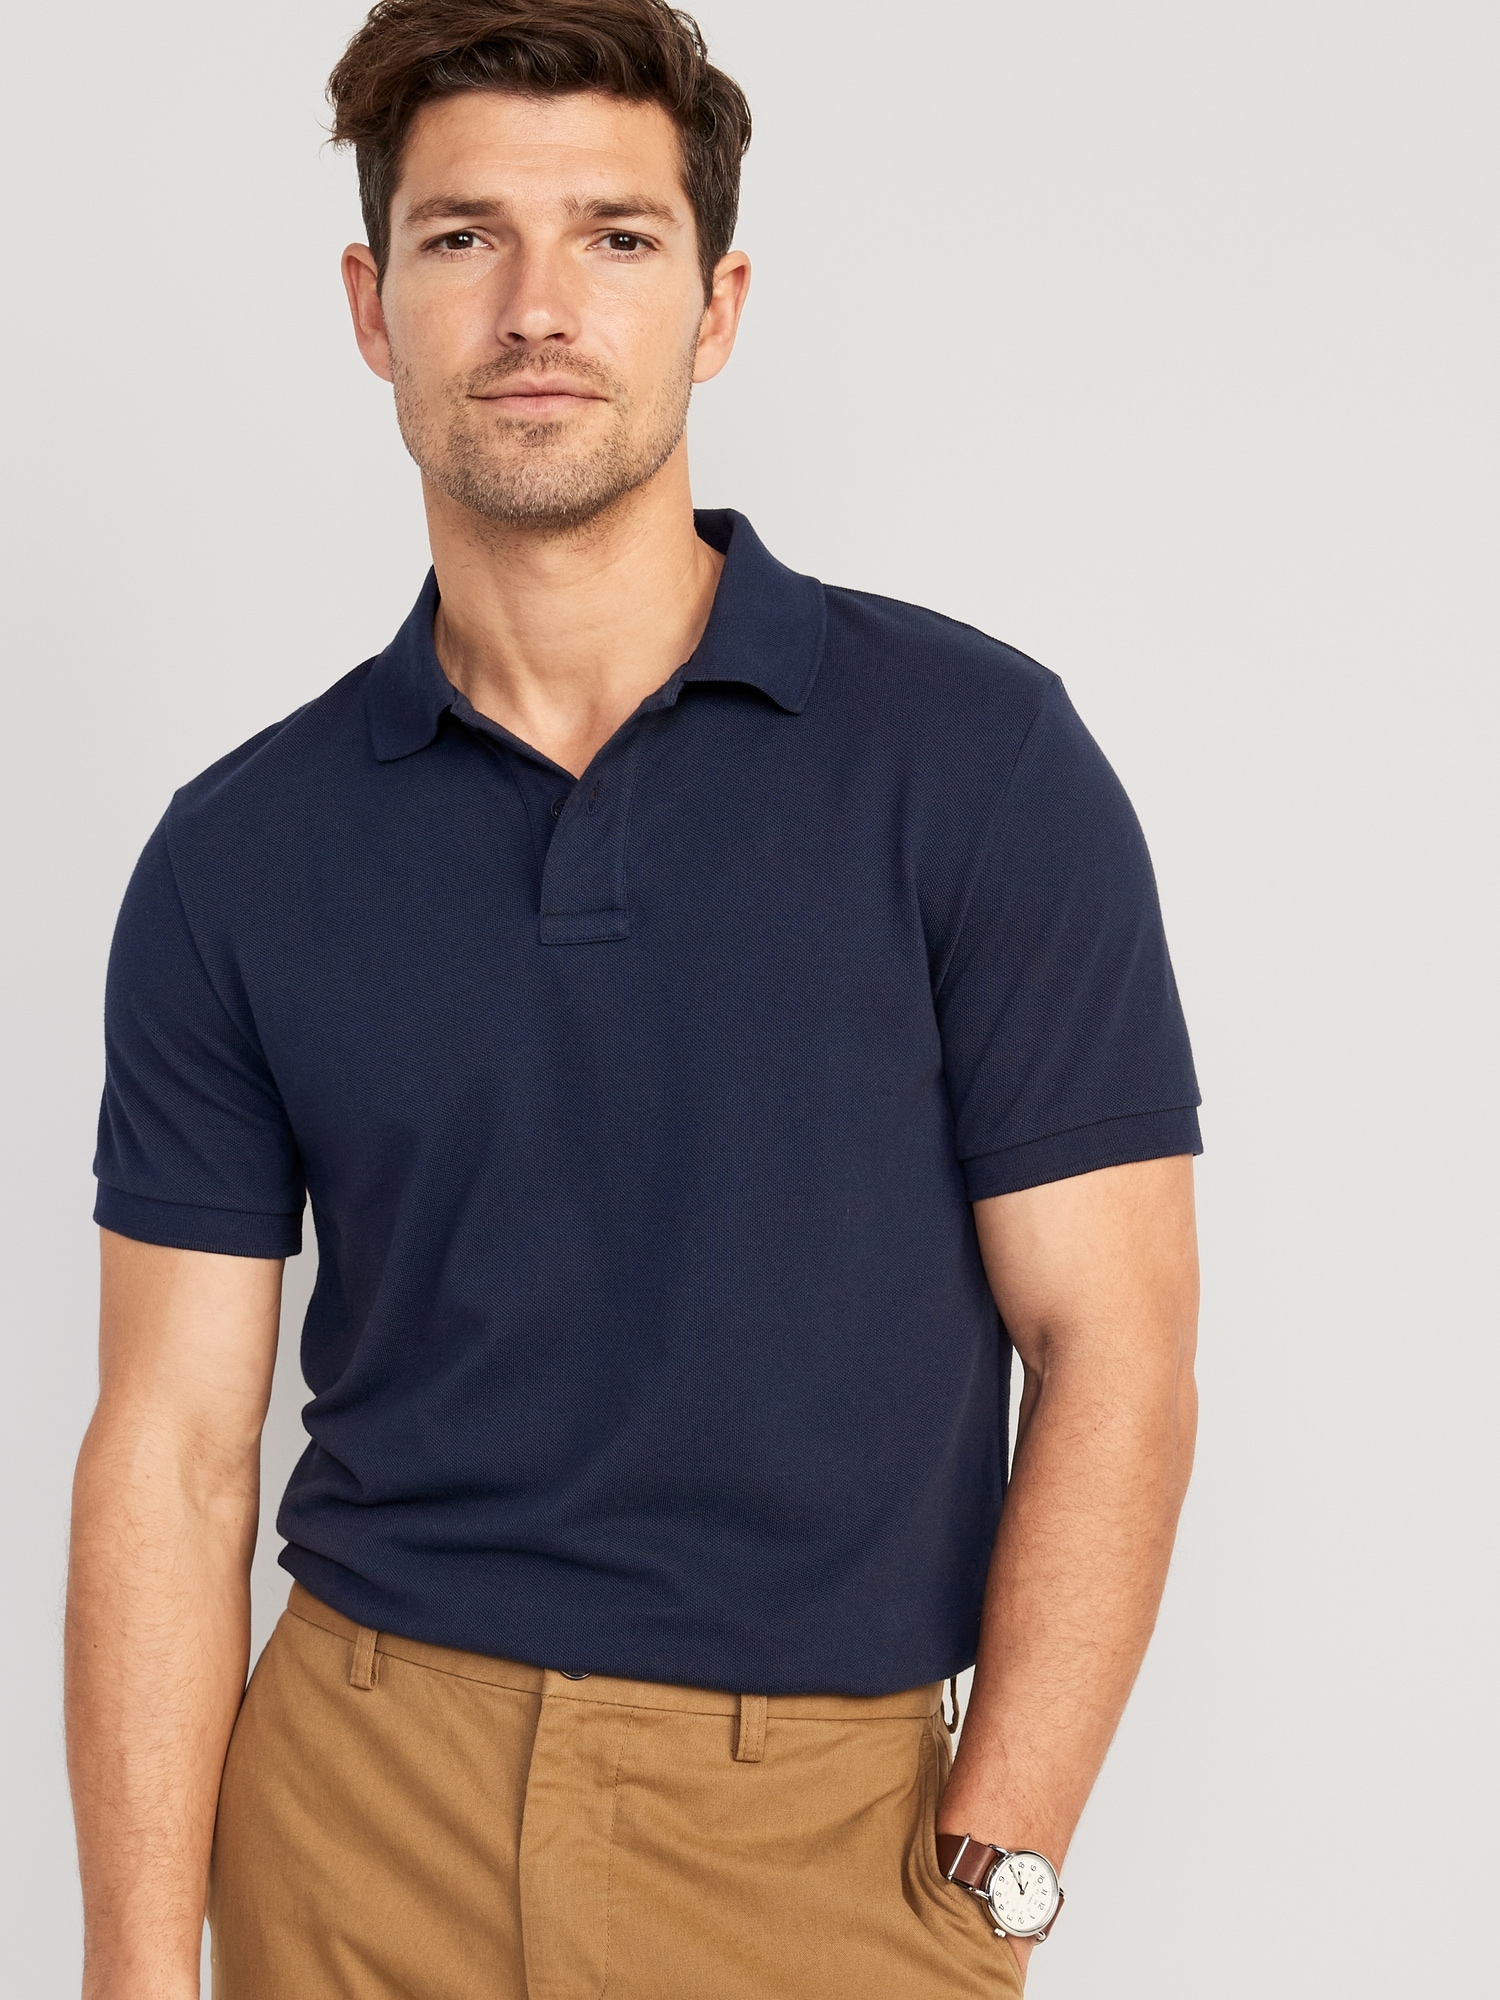 Uniform Pique Polo 2-Pack | Old Navy